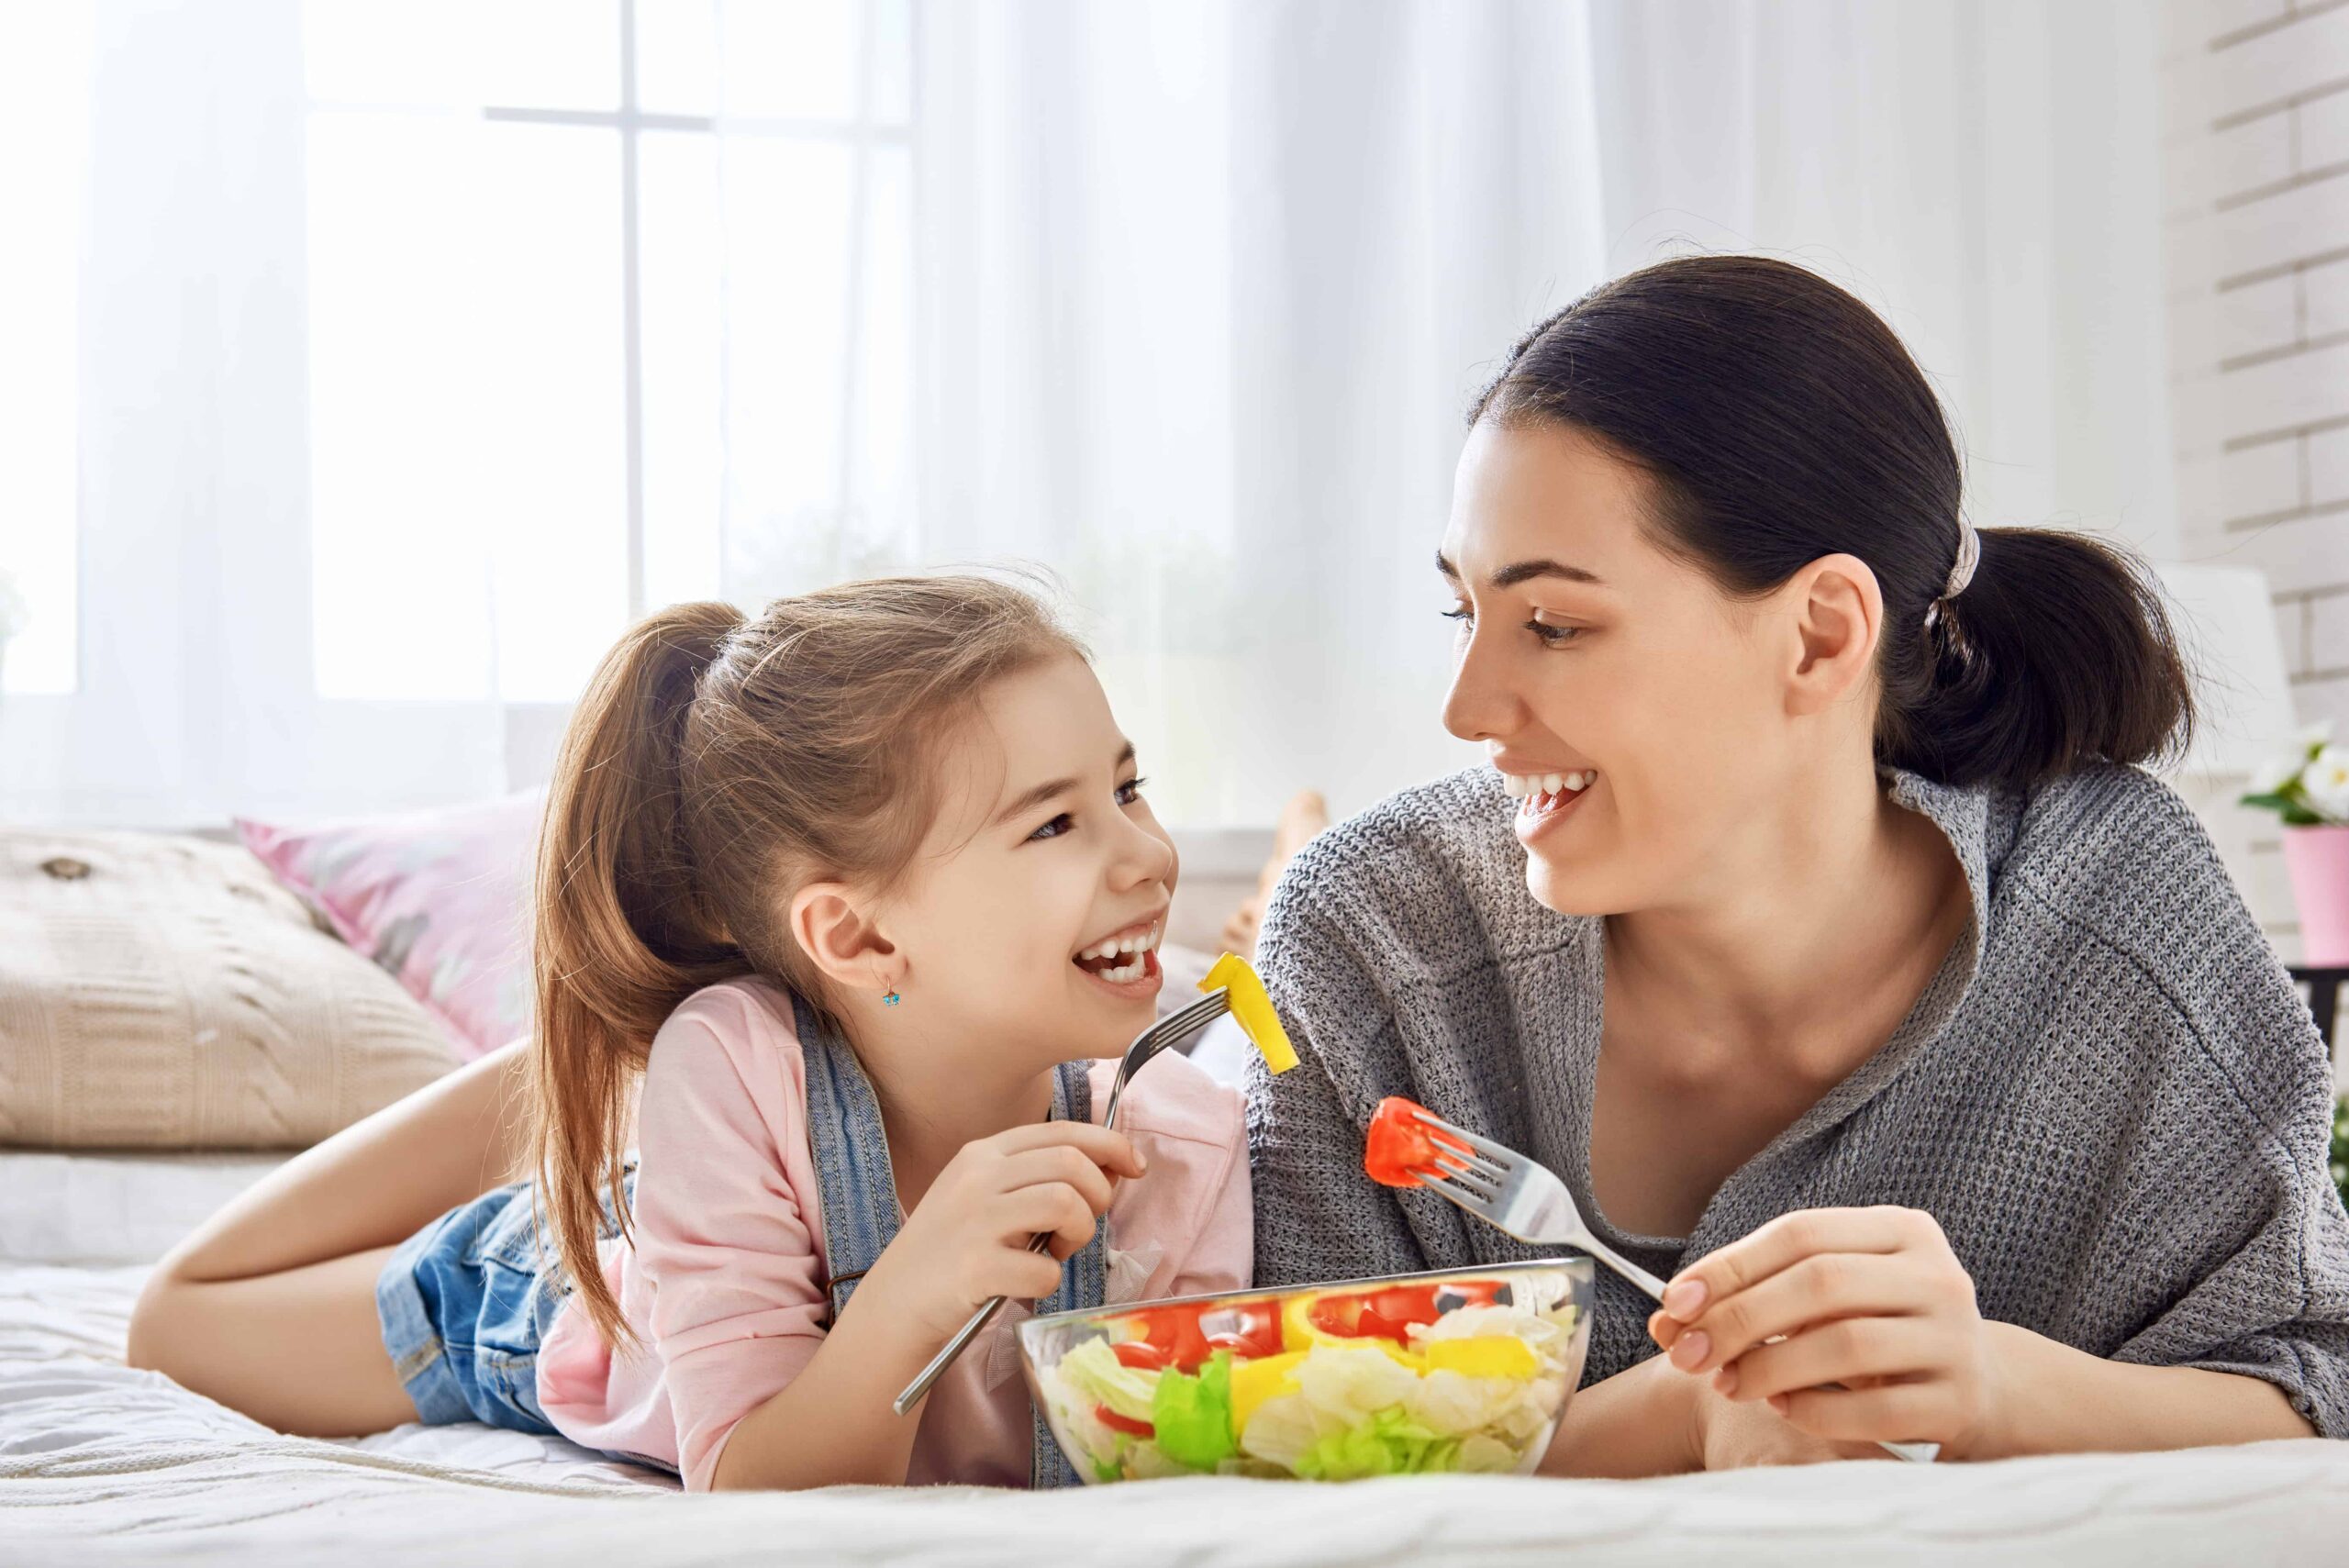 Dental care for children starts with a healthy diet